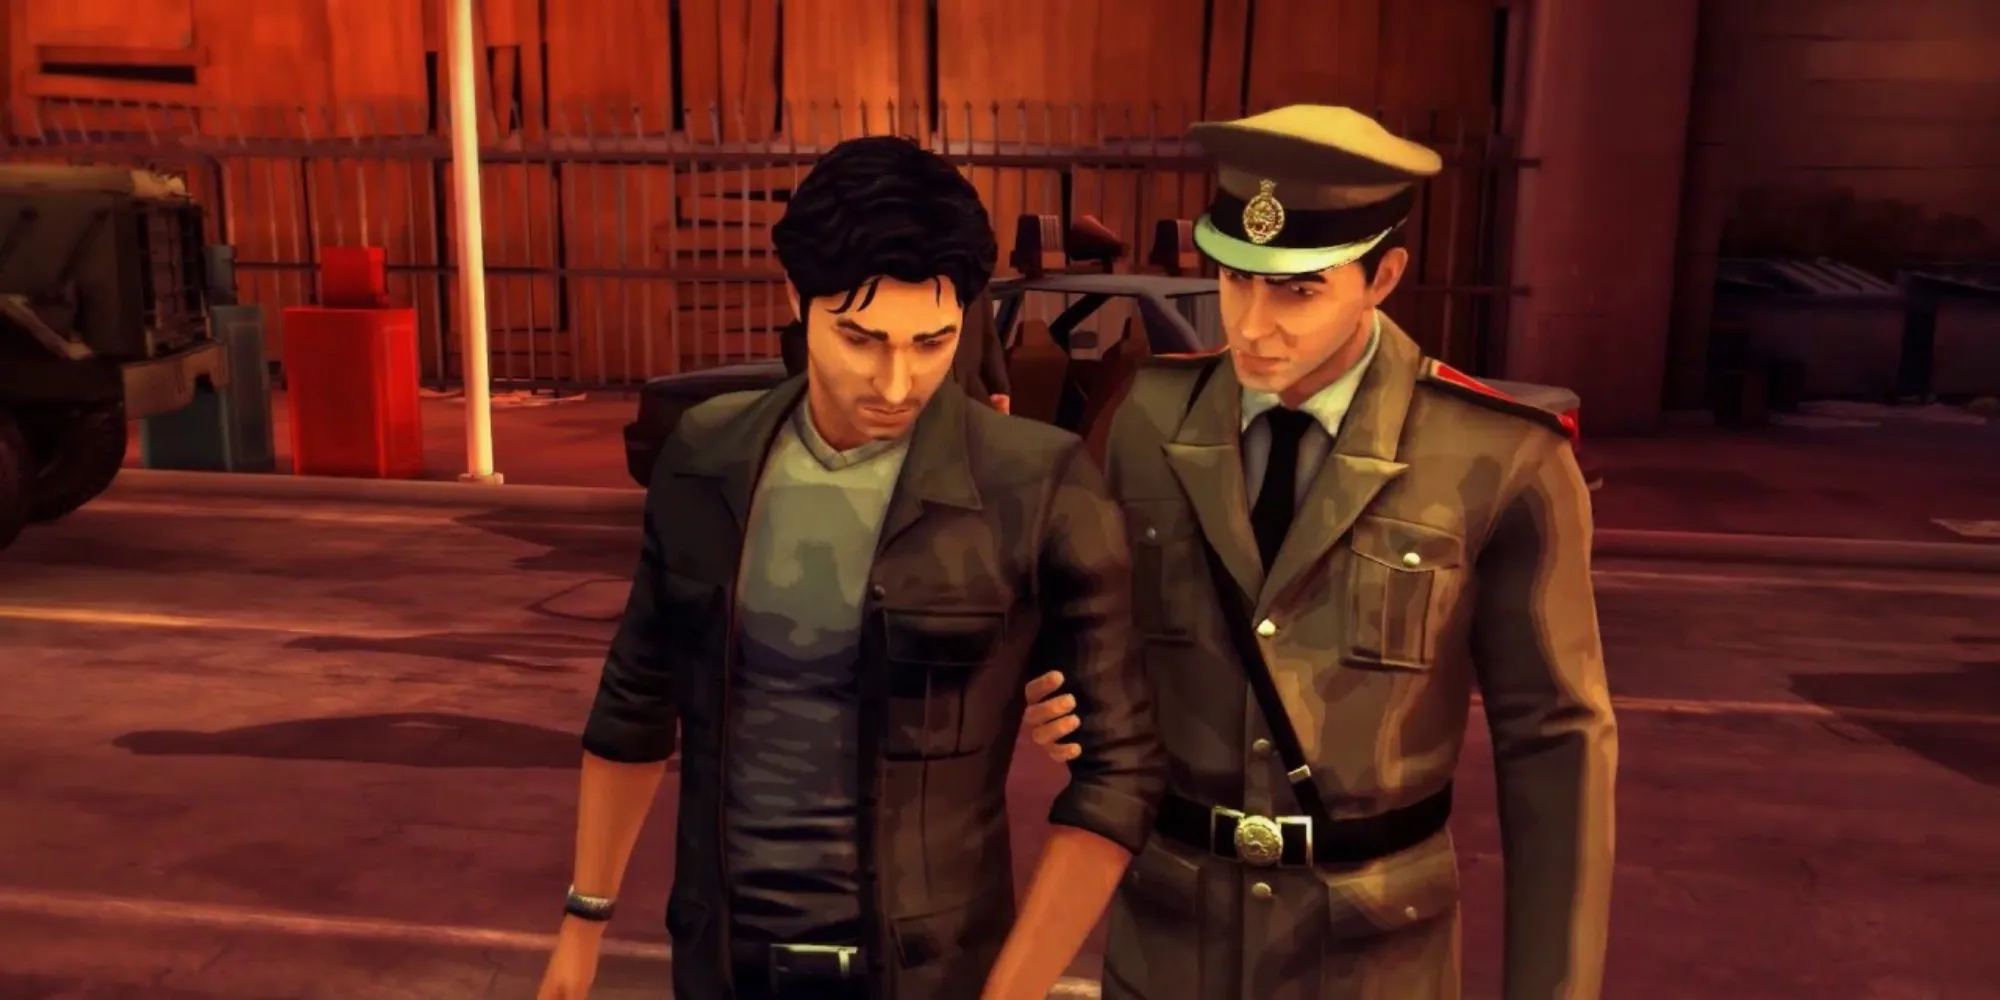 the protagonist with his police officer brother